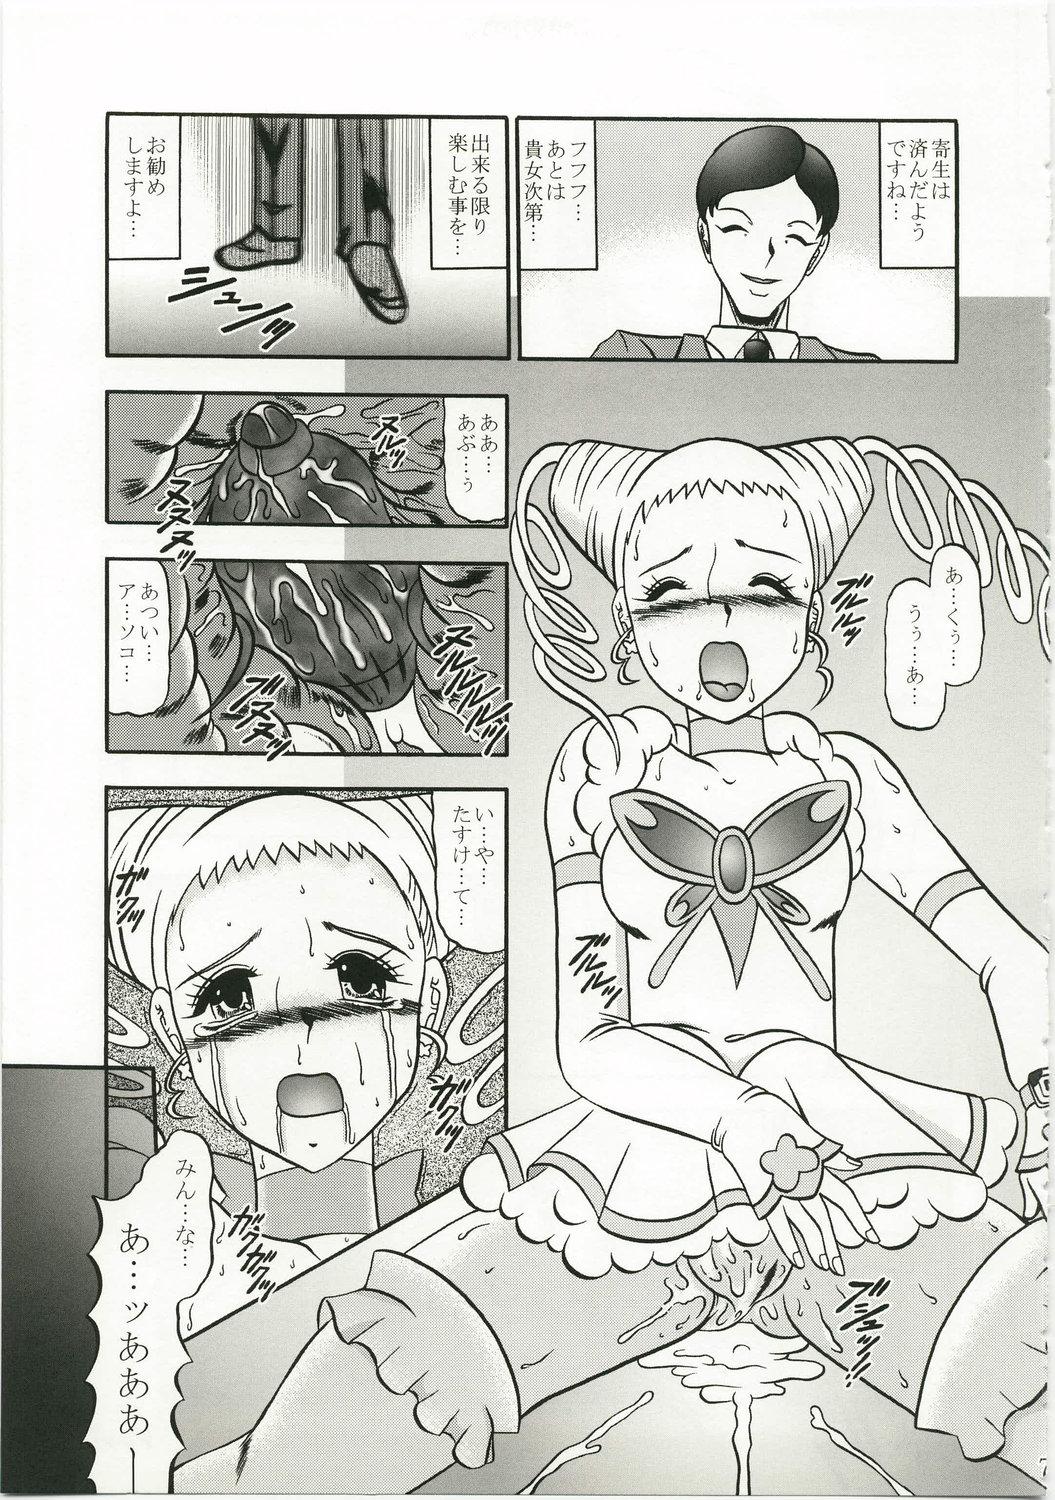 Blackmail GREATEST ECLIPSE Kochou Side:A - Pretty cure Yes precure 5 Cunnilingus - Page 7